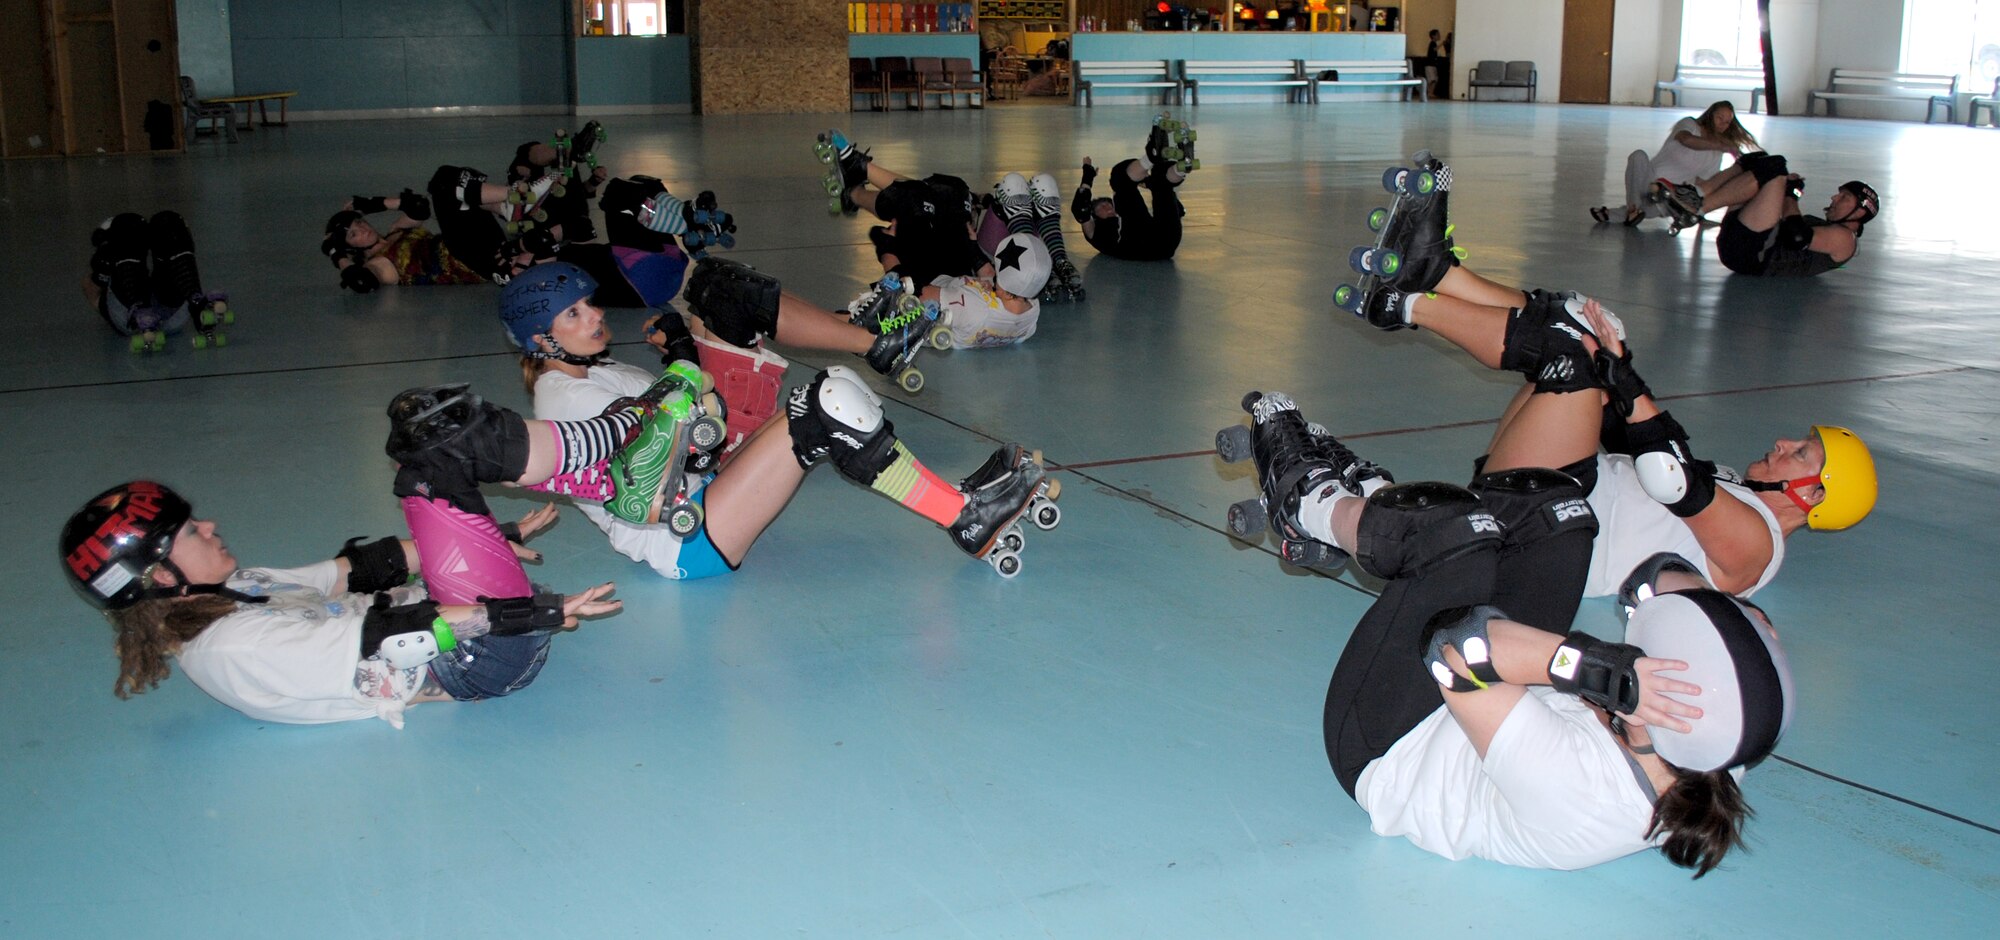 Electric City Roller GrrrlZ work on their fitness by doing sit-ups to wrap up their 2-hour practice at Hauers Family Skating Center on June 24. More than 25 women practice twice a week, but only 15 members will be selected to compete in a bout. (U.S. Air Force photo/Airman 1st Class Katrina Heikkinen) 